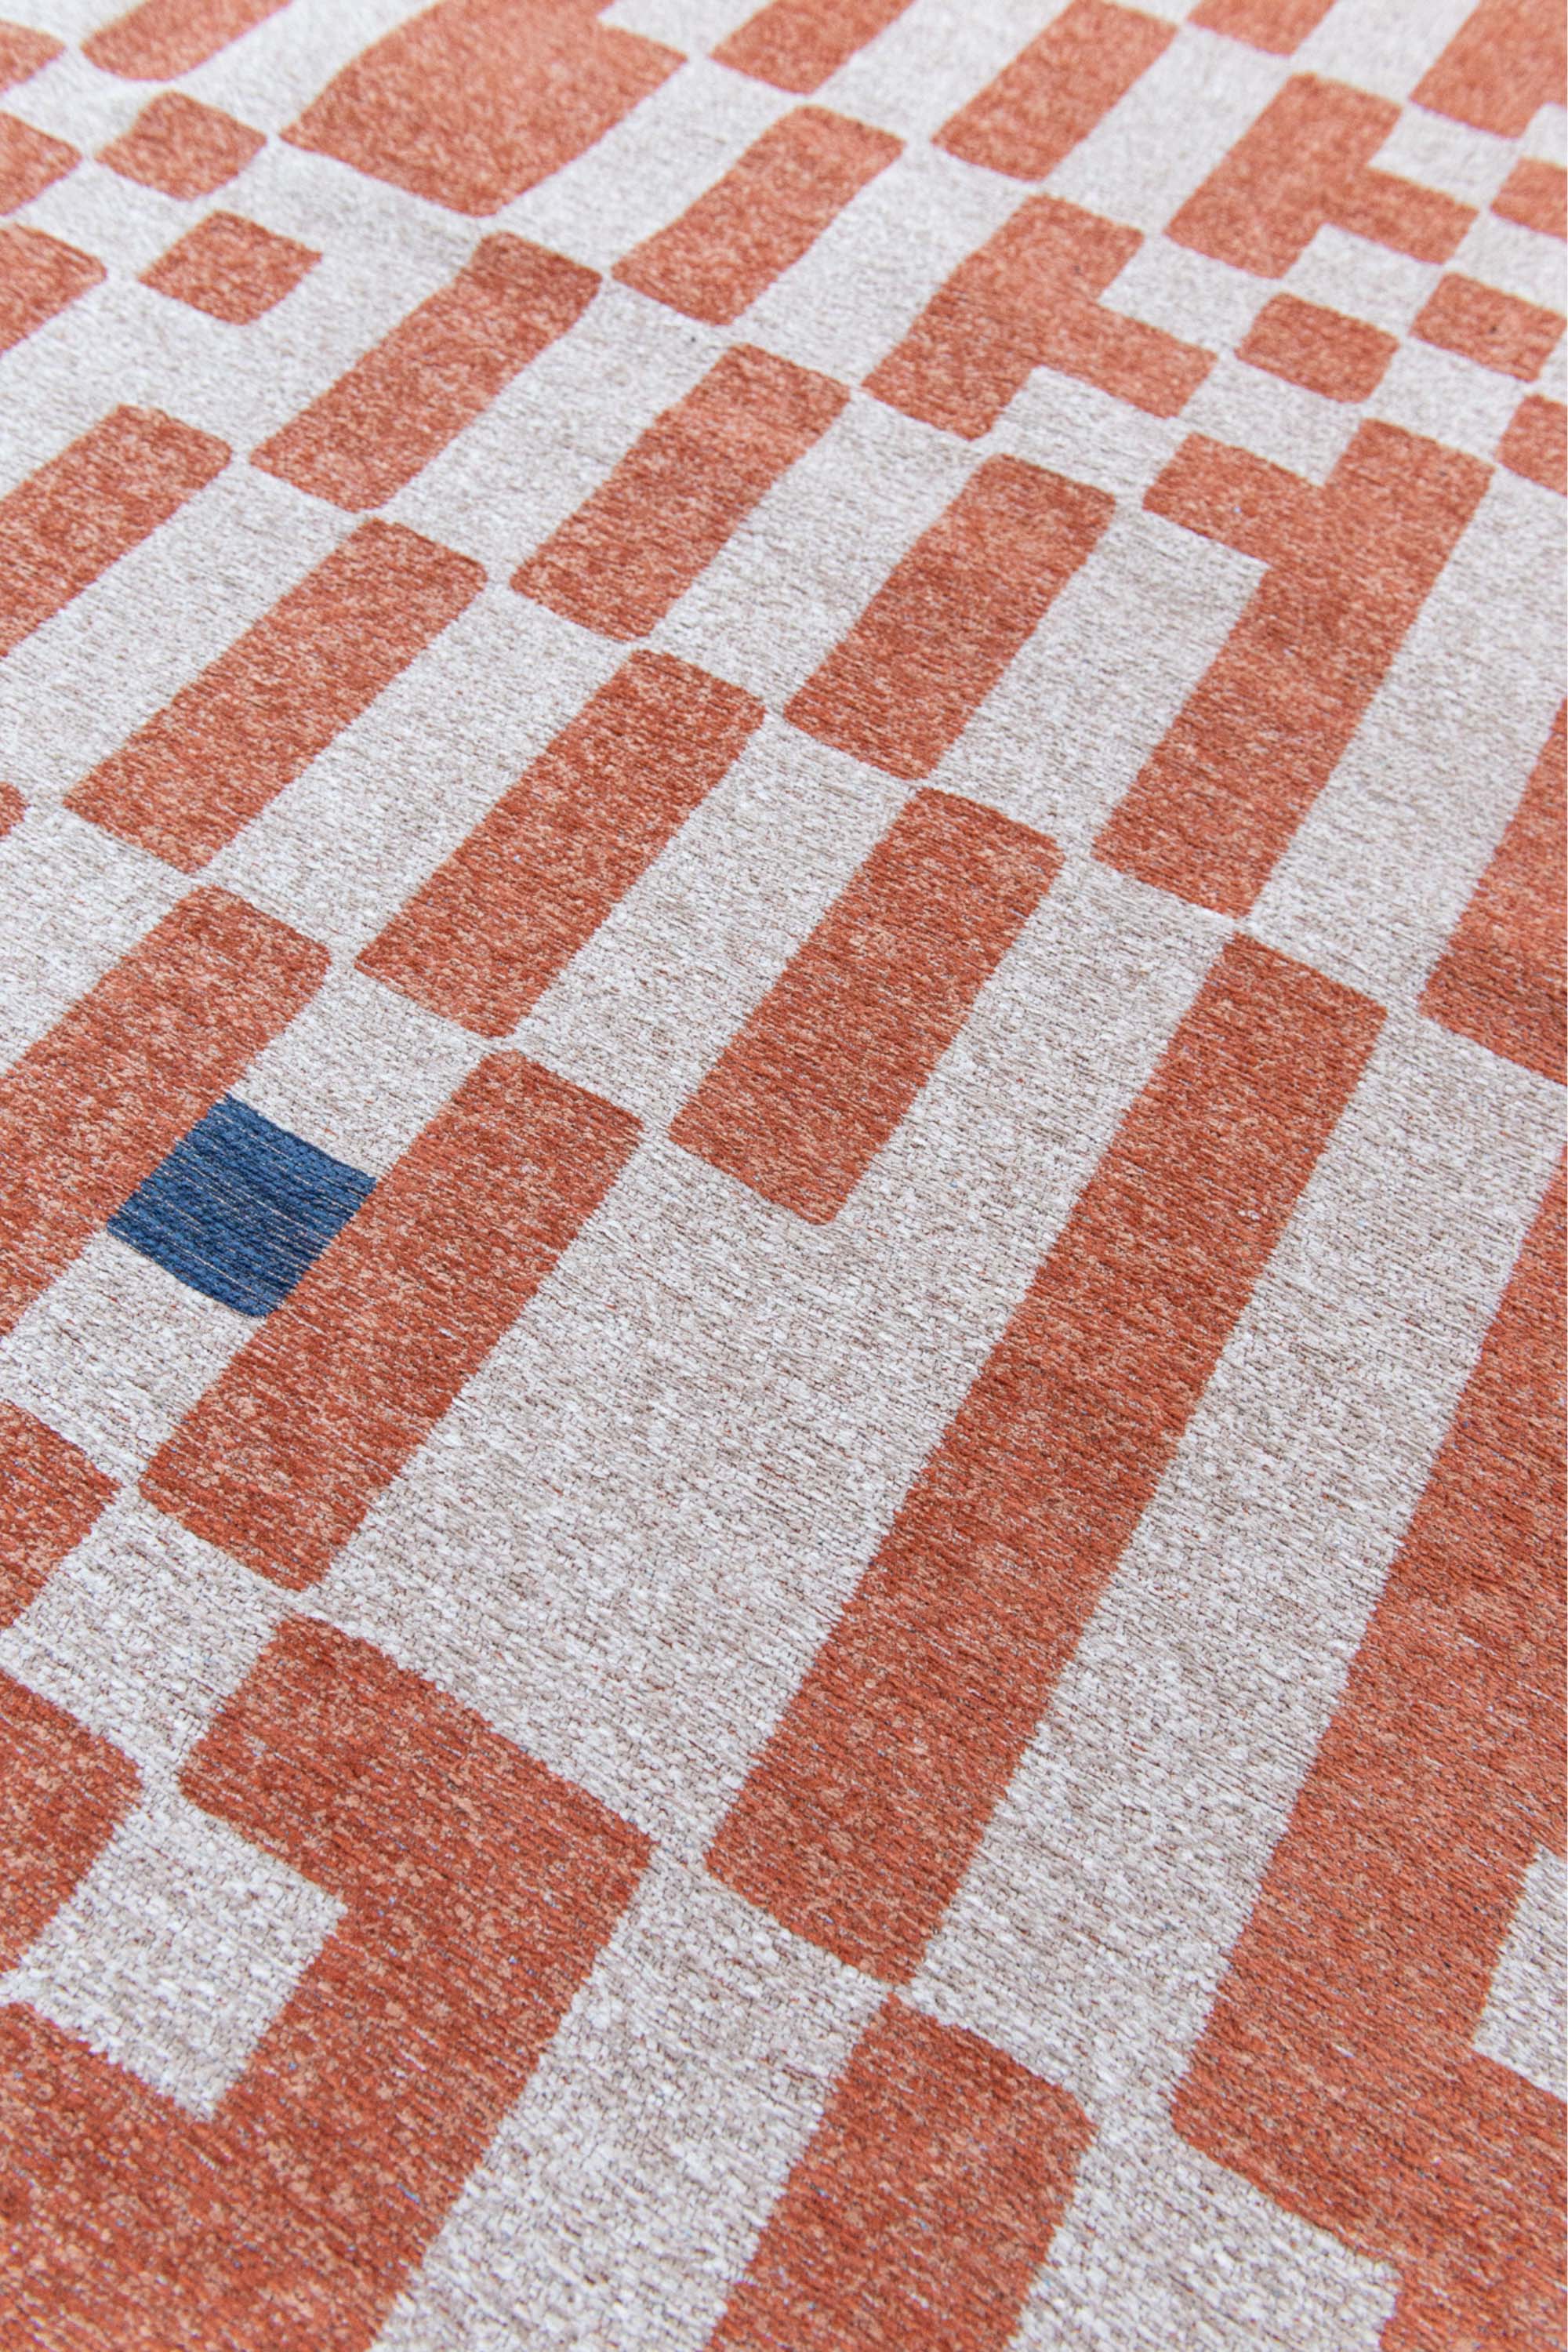 Abstract geometric rug with orange, blue, and white tones